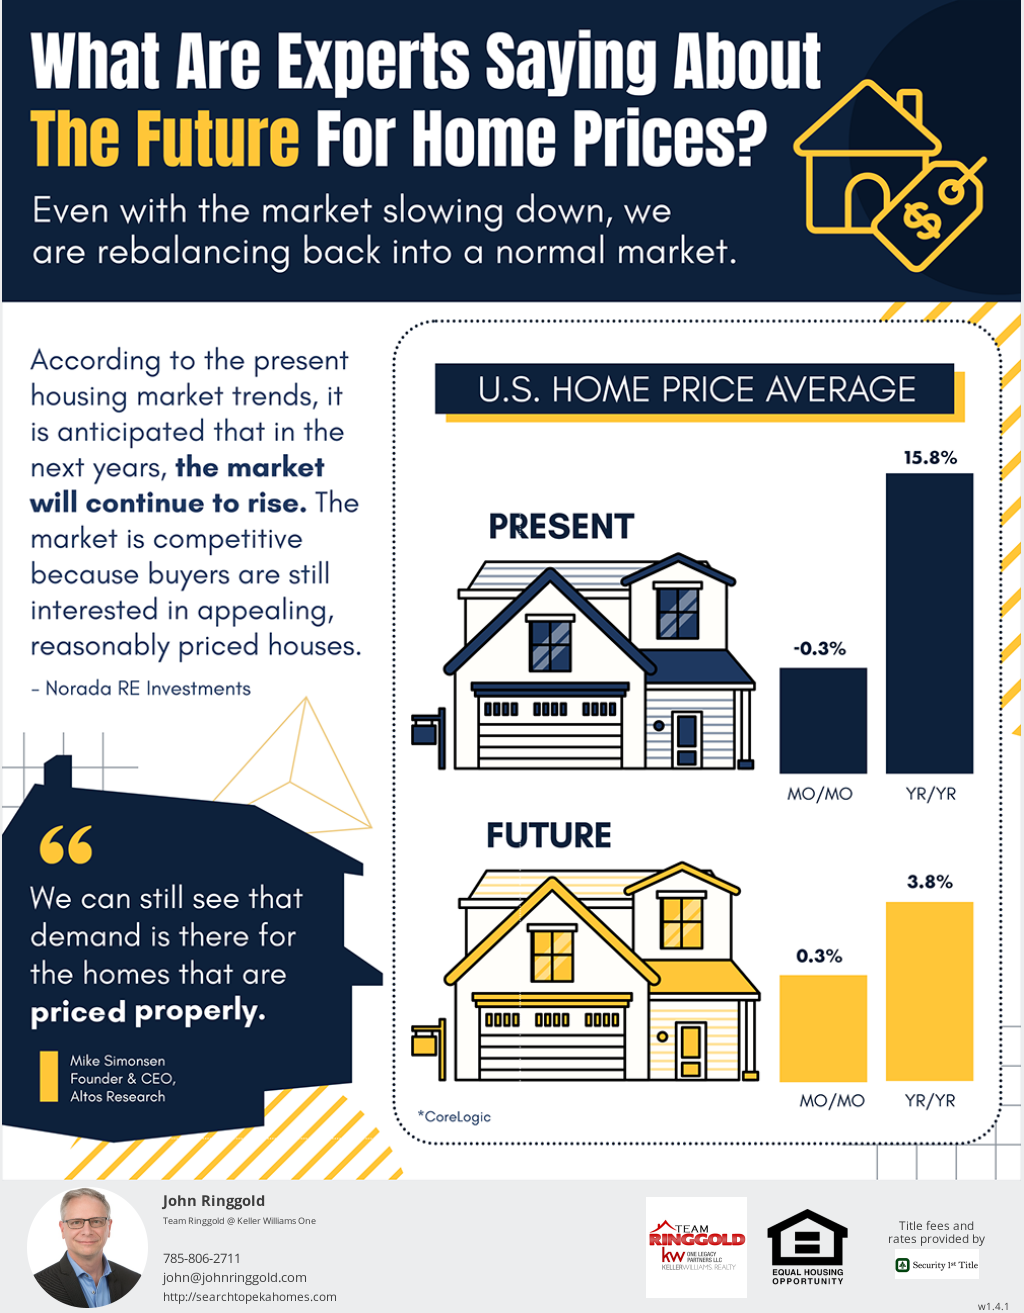 The Future of Home Prices in Topeka